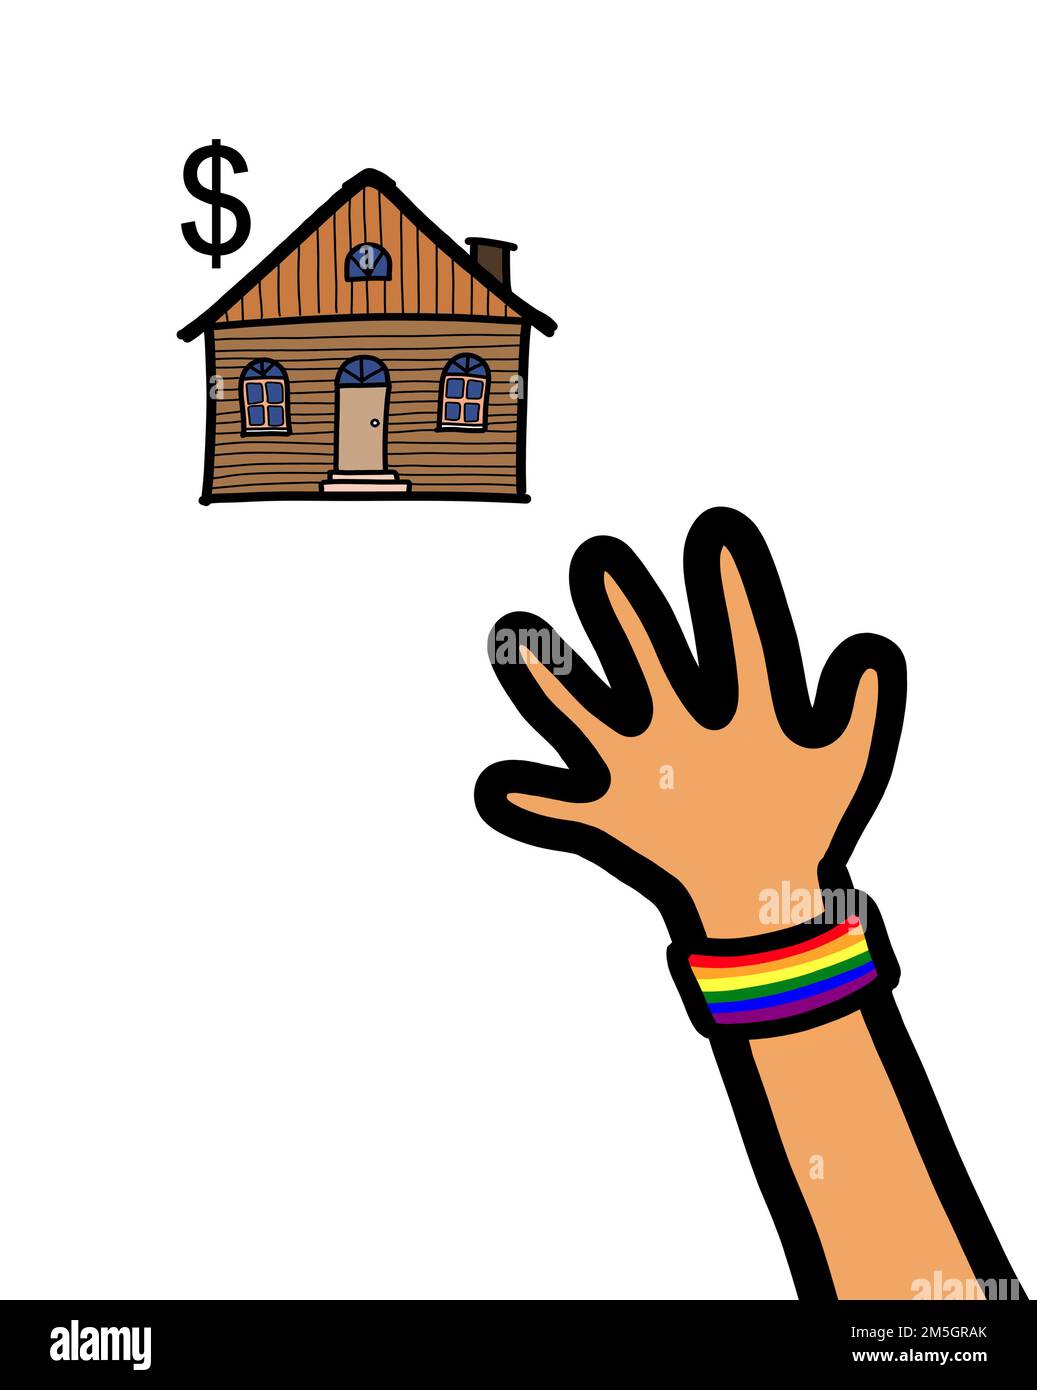 A group of people hands reaching up a house property. Affordability for housing and home ownership concept. Stock Photo